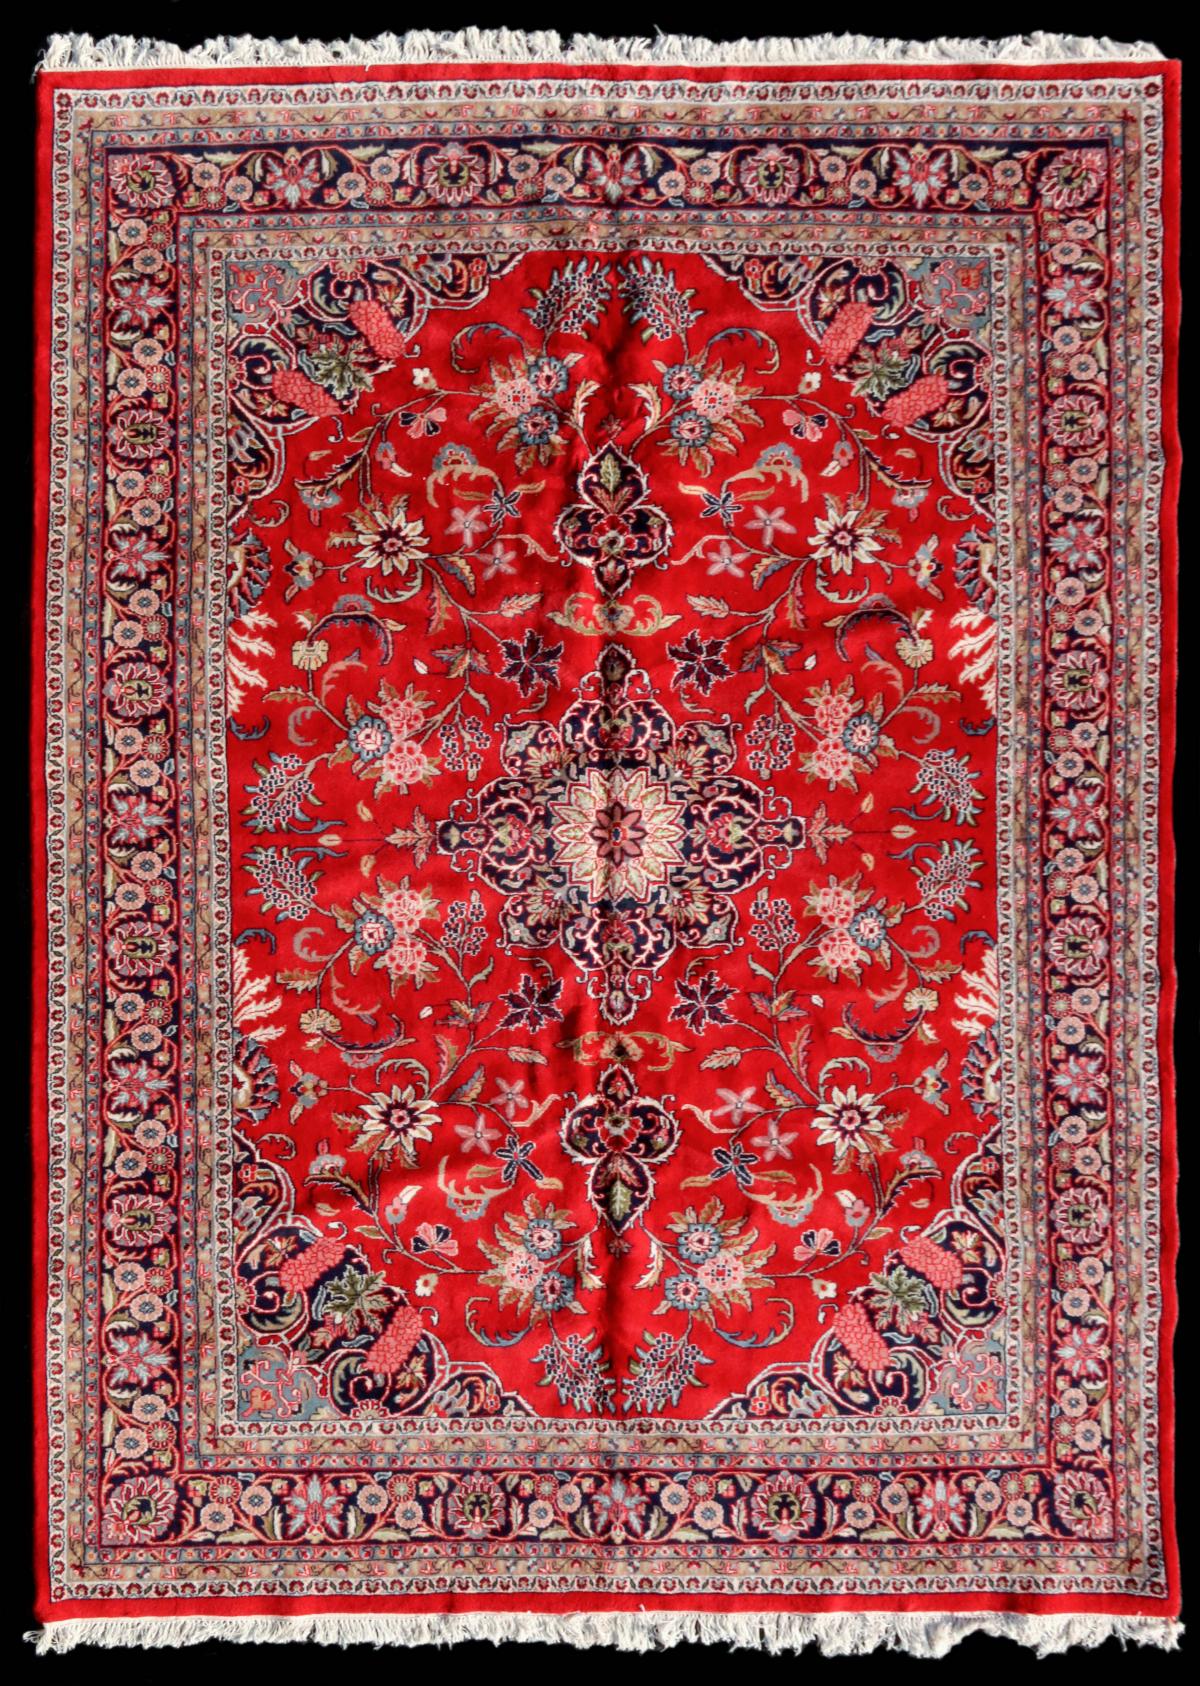 AN 8 X 11 HAND MADE INDO PERSIAN ROOM SIZED CARPET